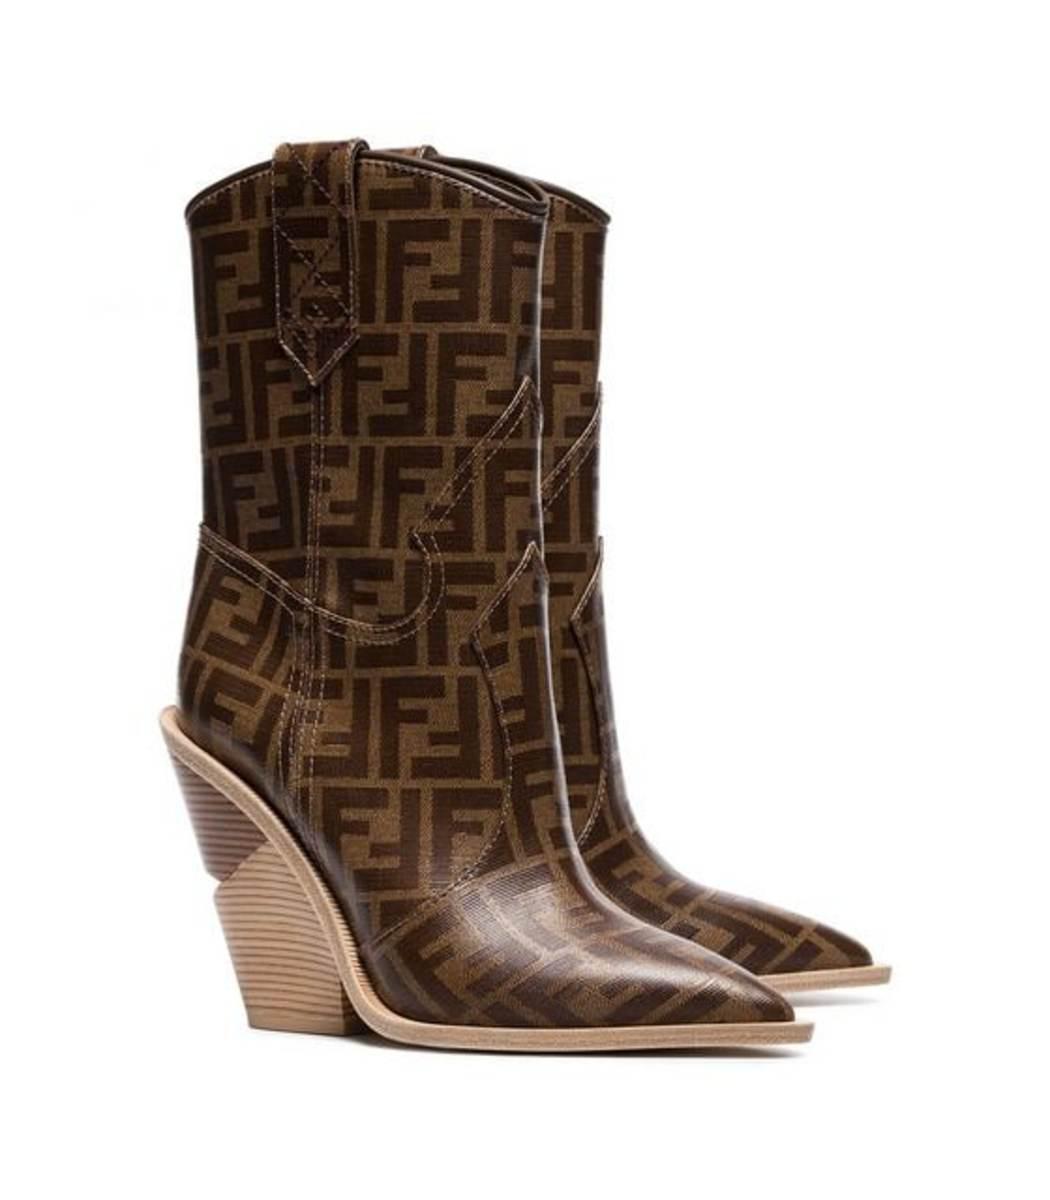 Fendi Leather Printed Cowboy Boots in 